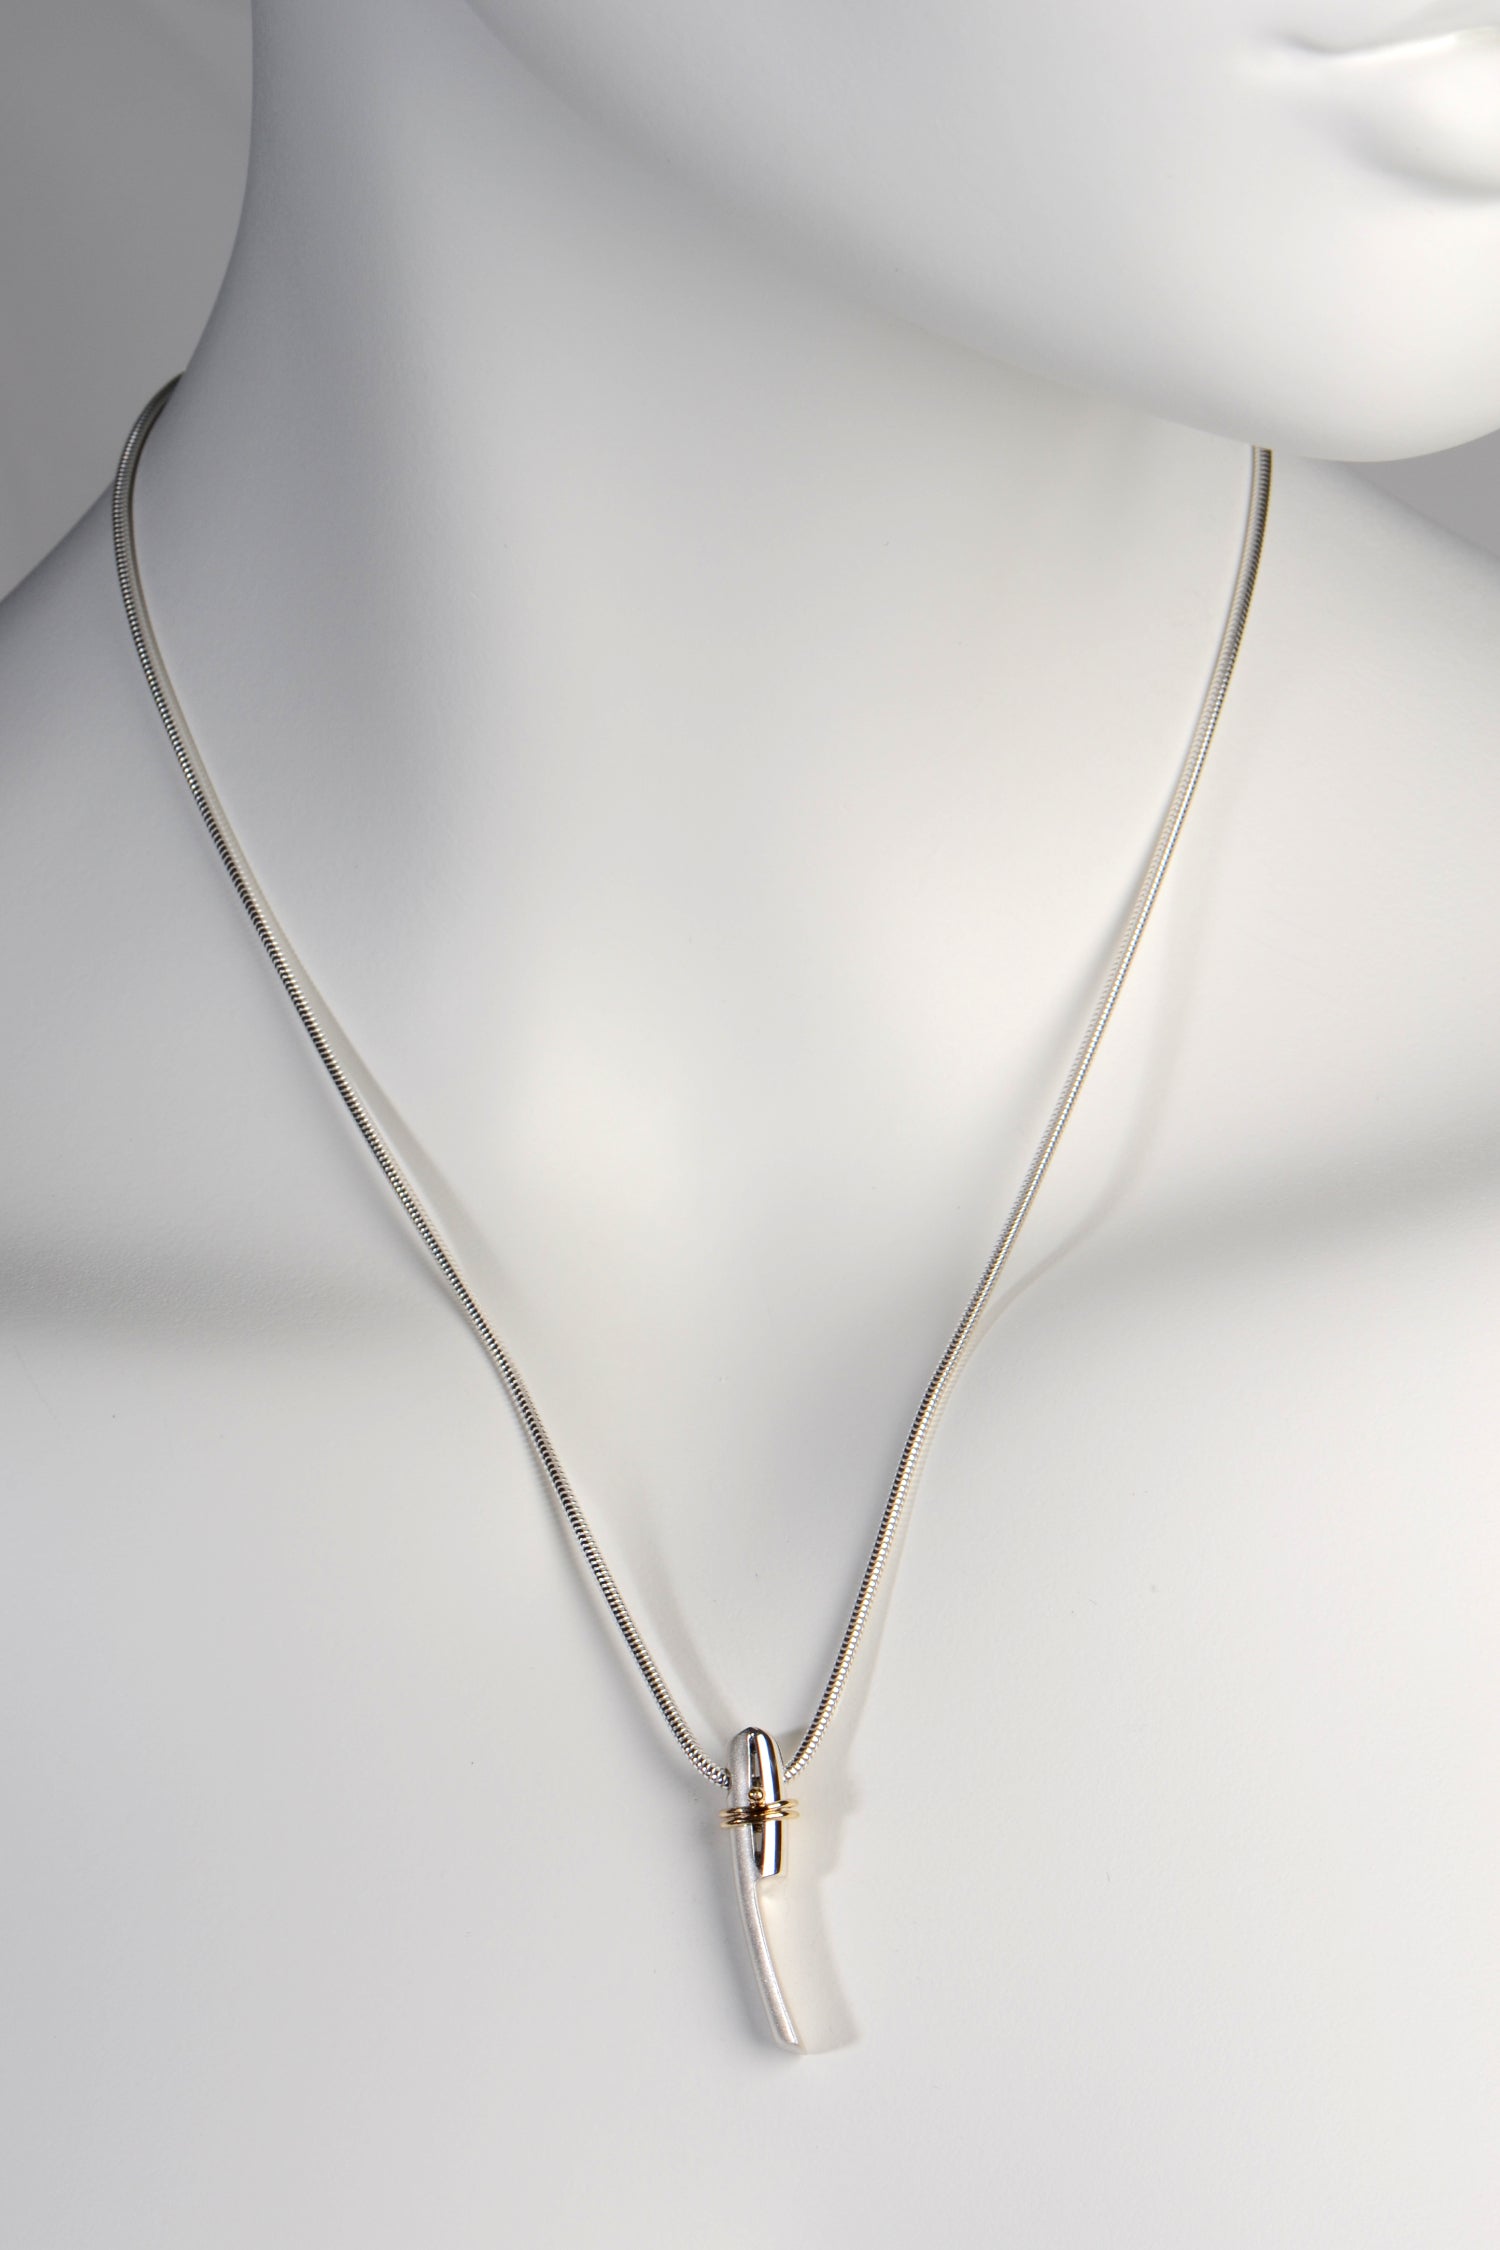 silver and gold pendant on 45cm long silver chain